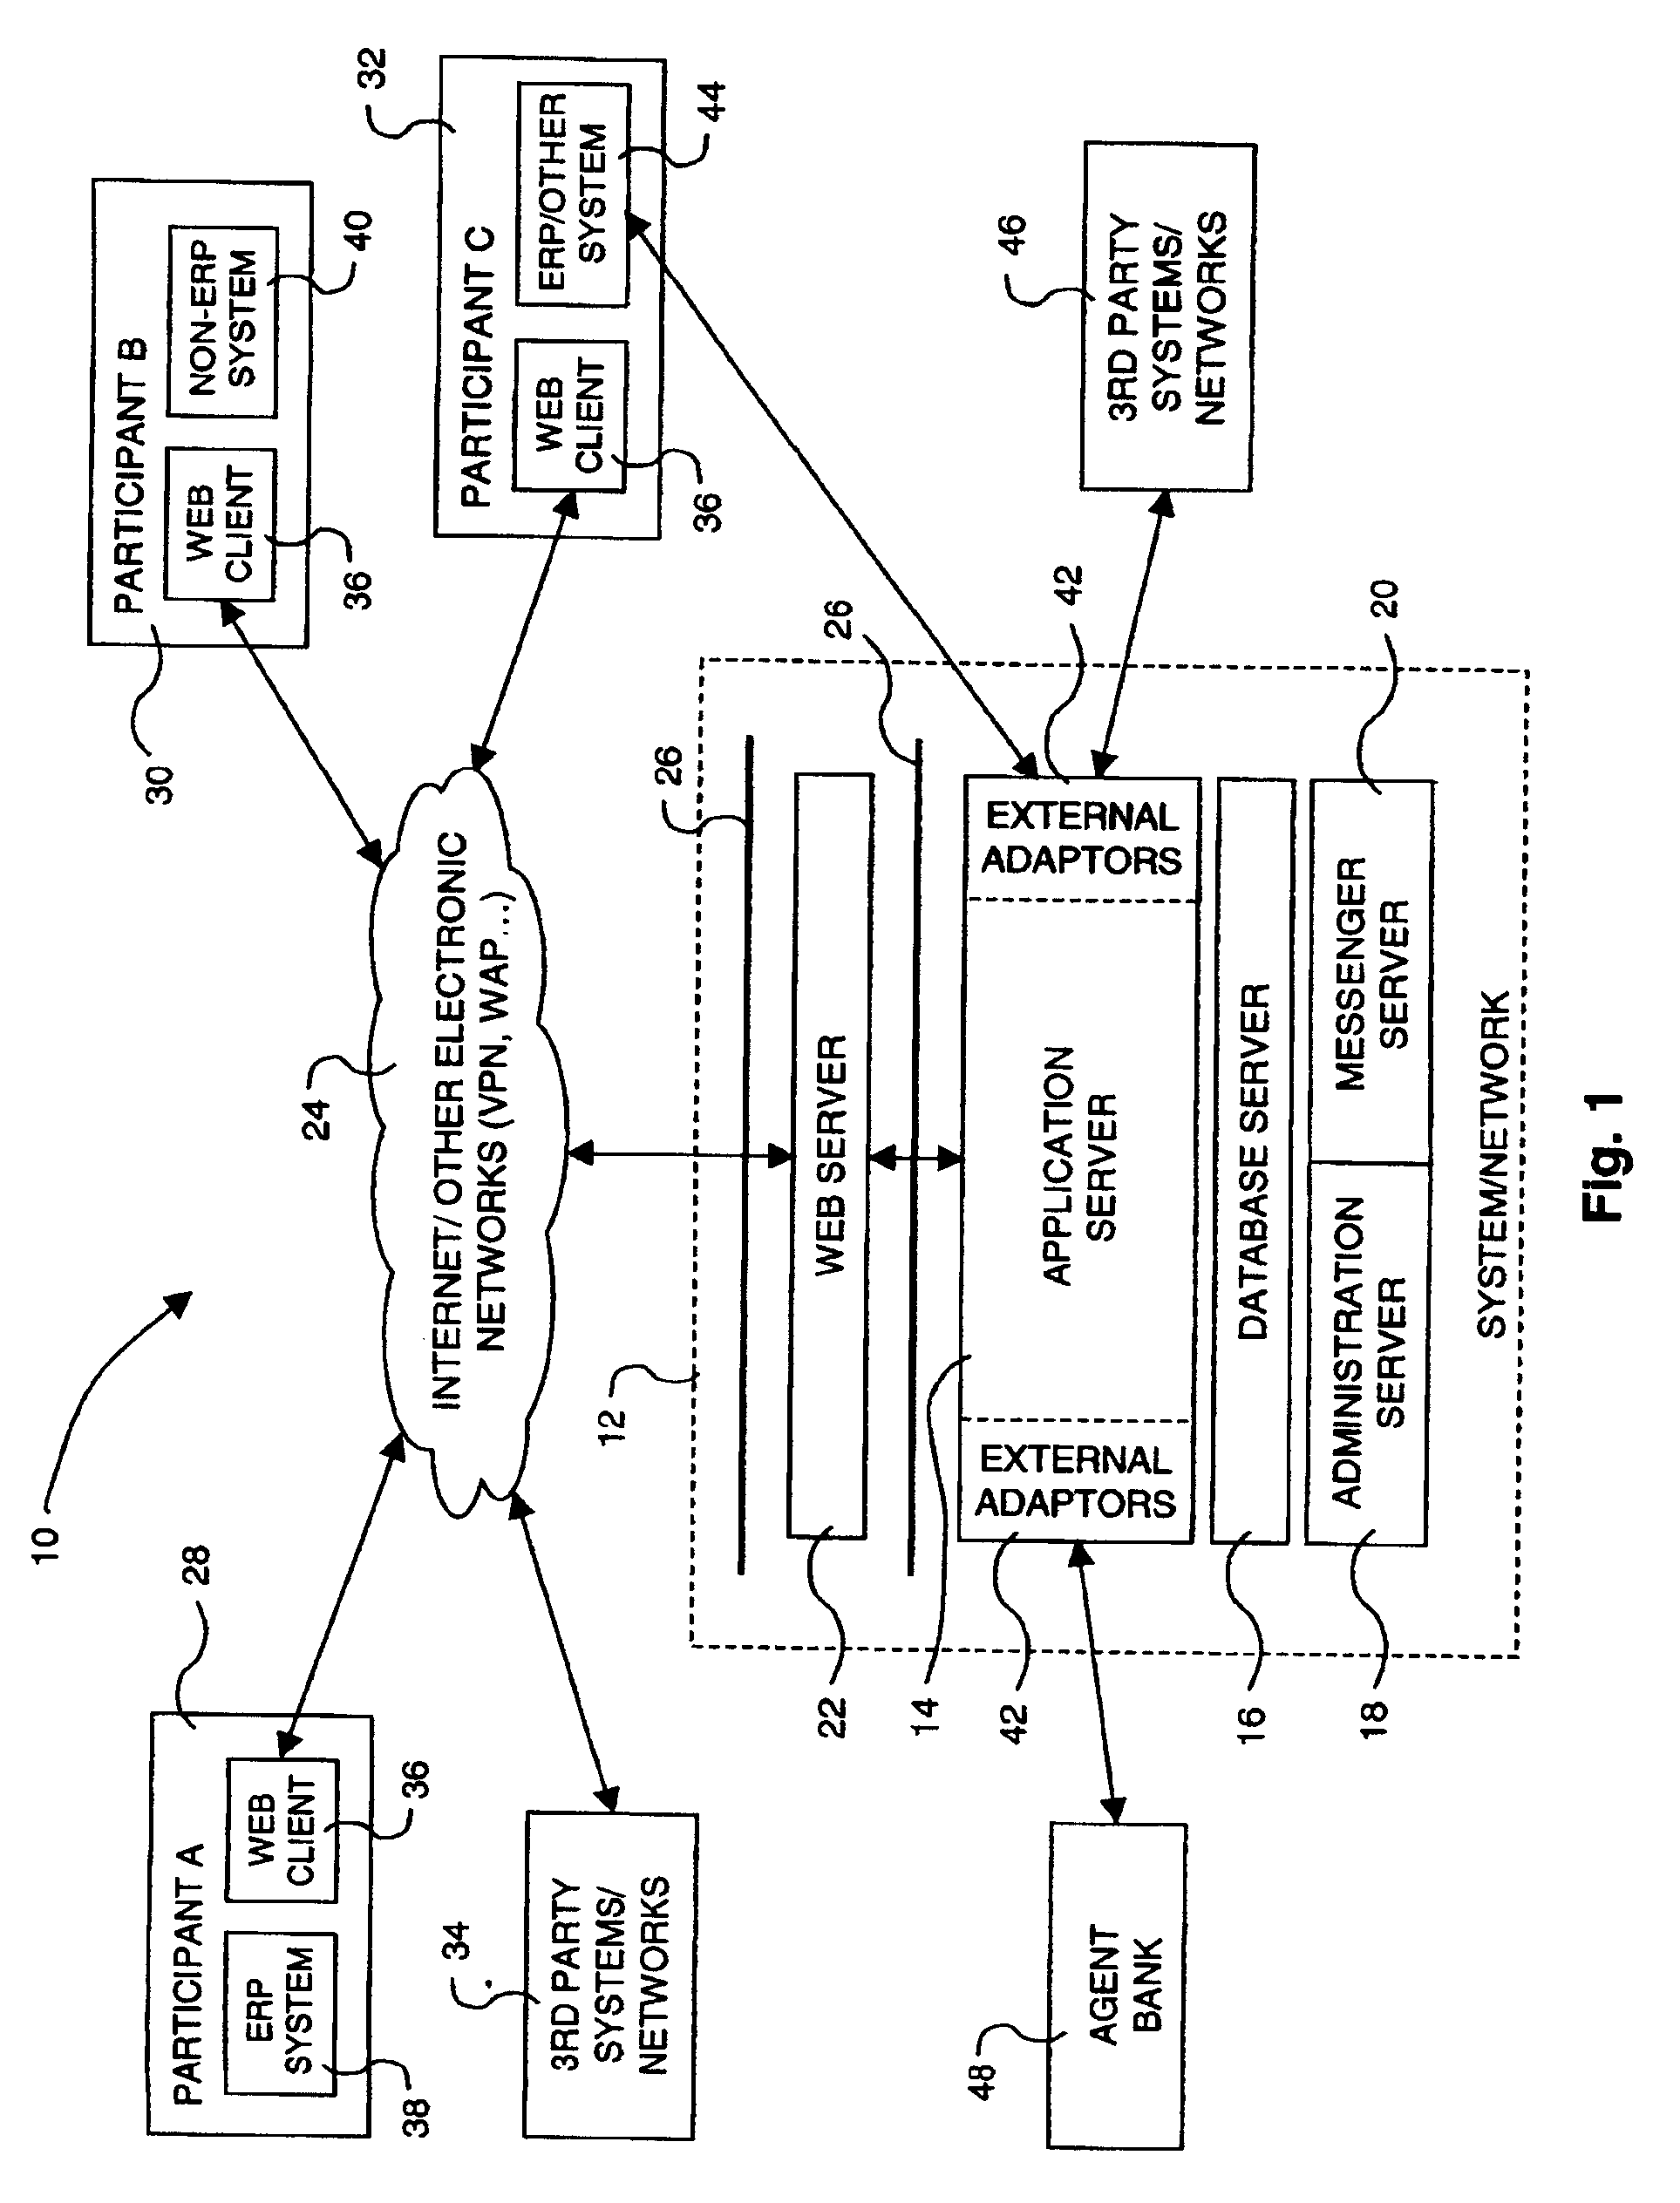 Electronic multiparty accounts receivable and accounts payable system